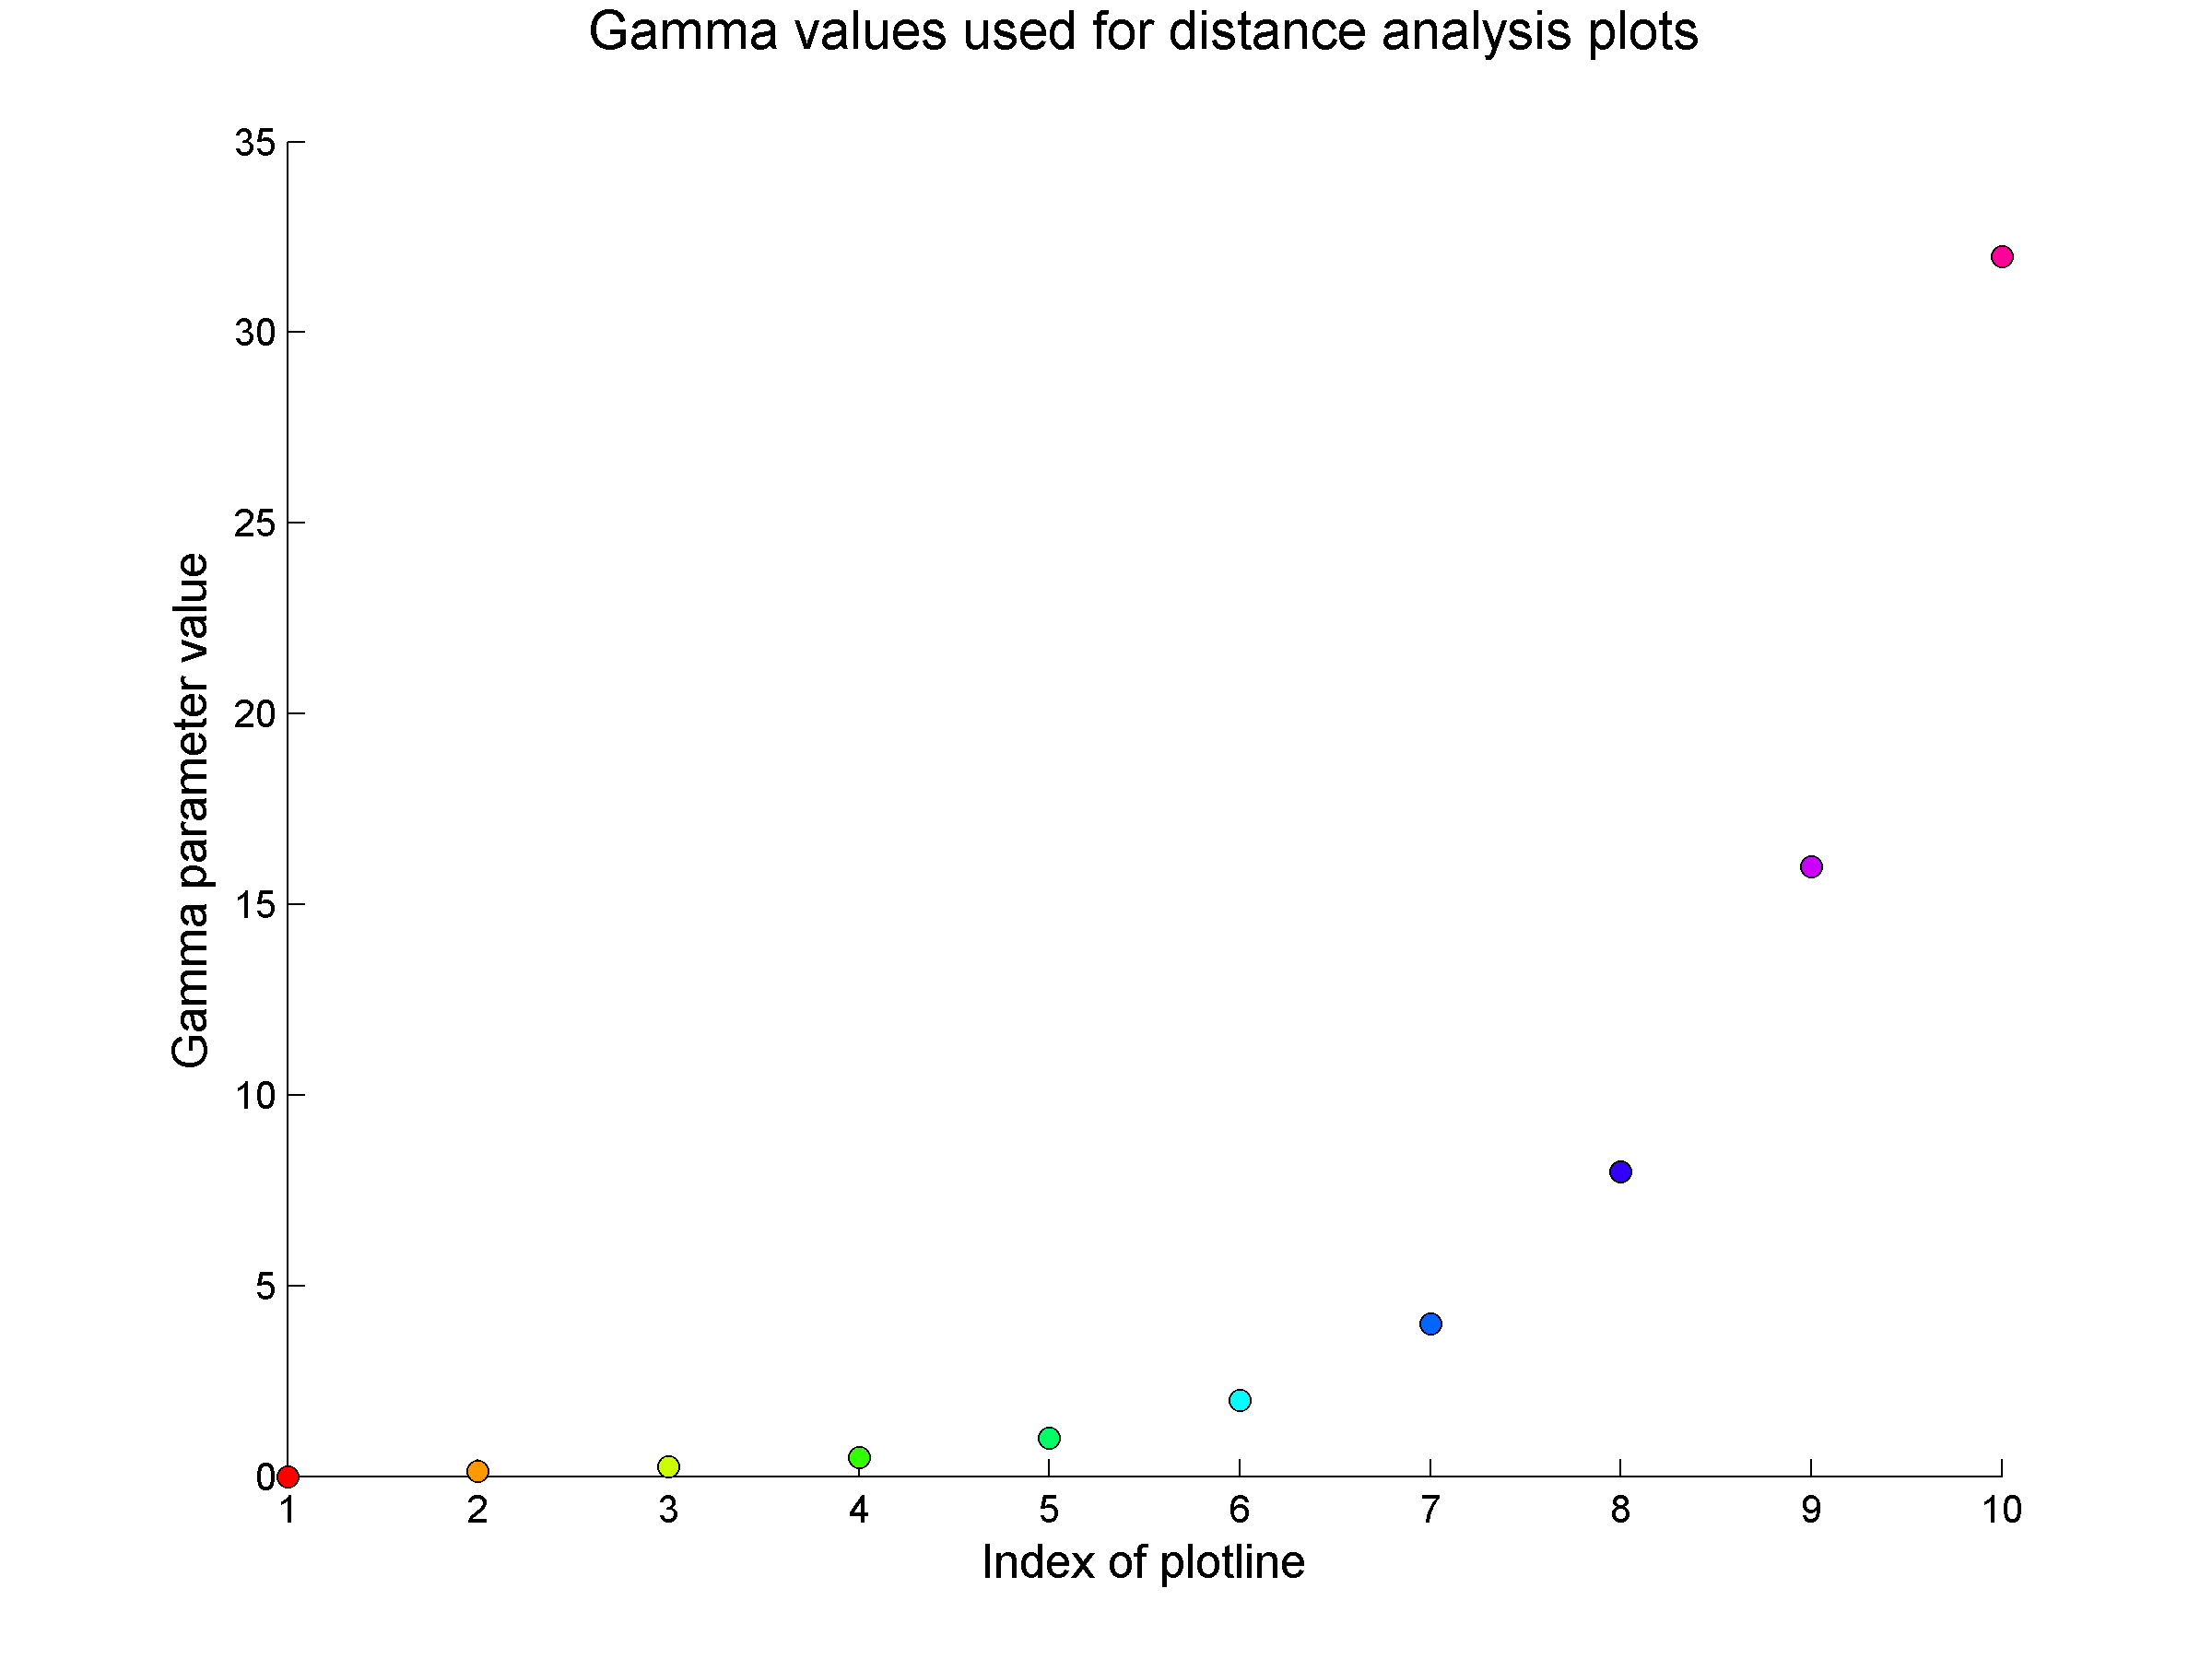 Plot of the gamma values used in the figures from the rest of this post